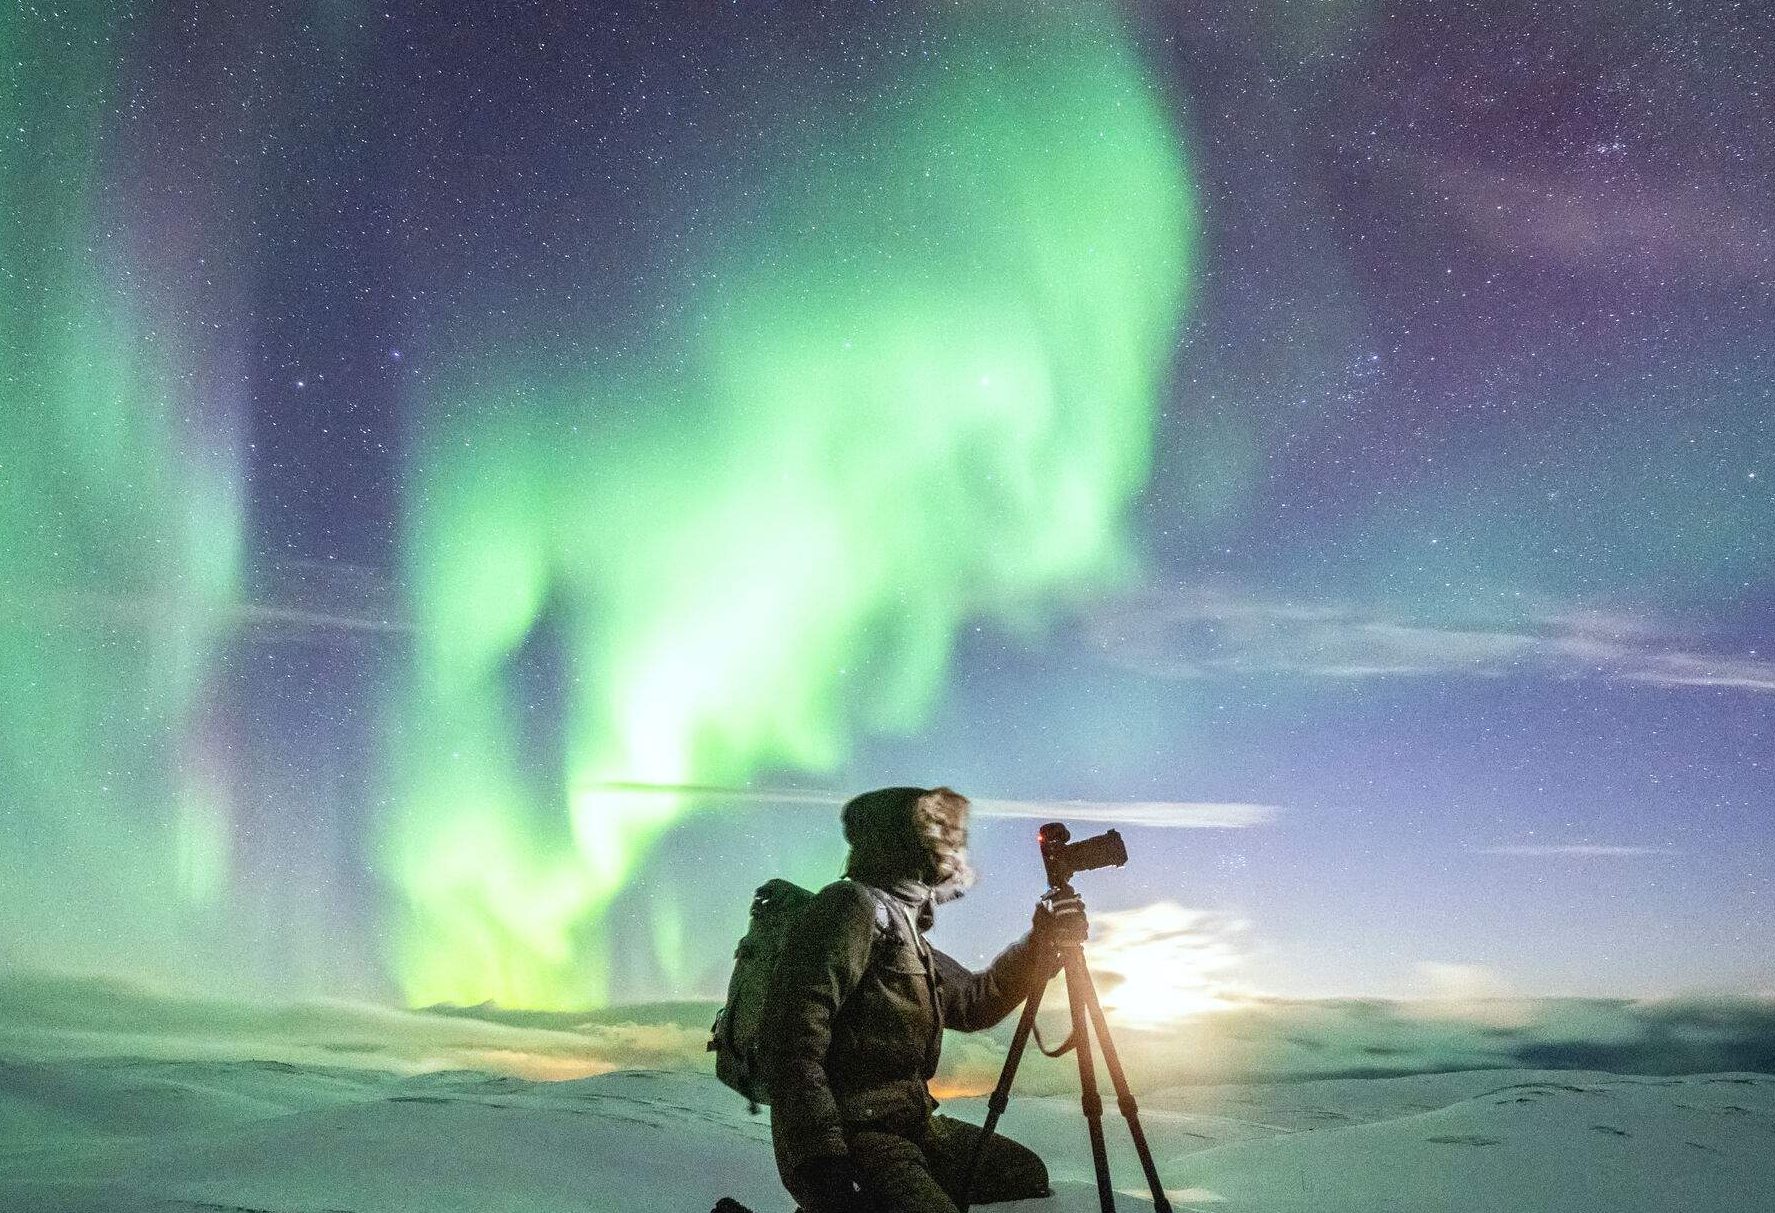 A photographer takes pictures of the Northern green lights dazzling in the sky with bended knees on his tripod.